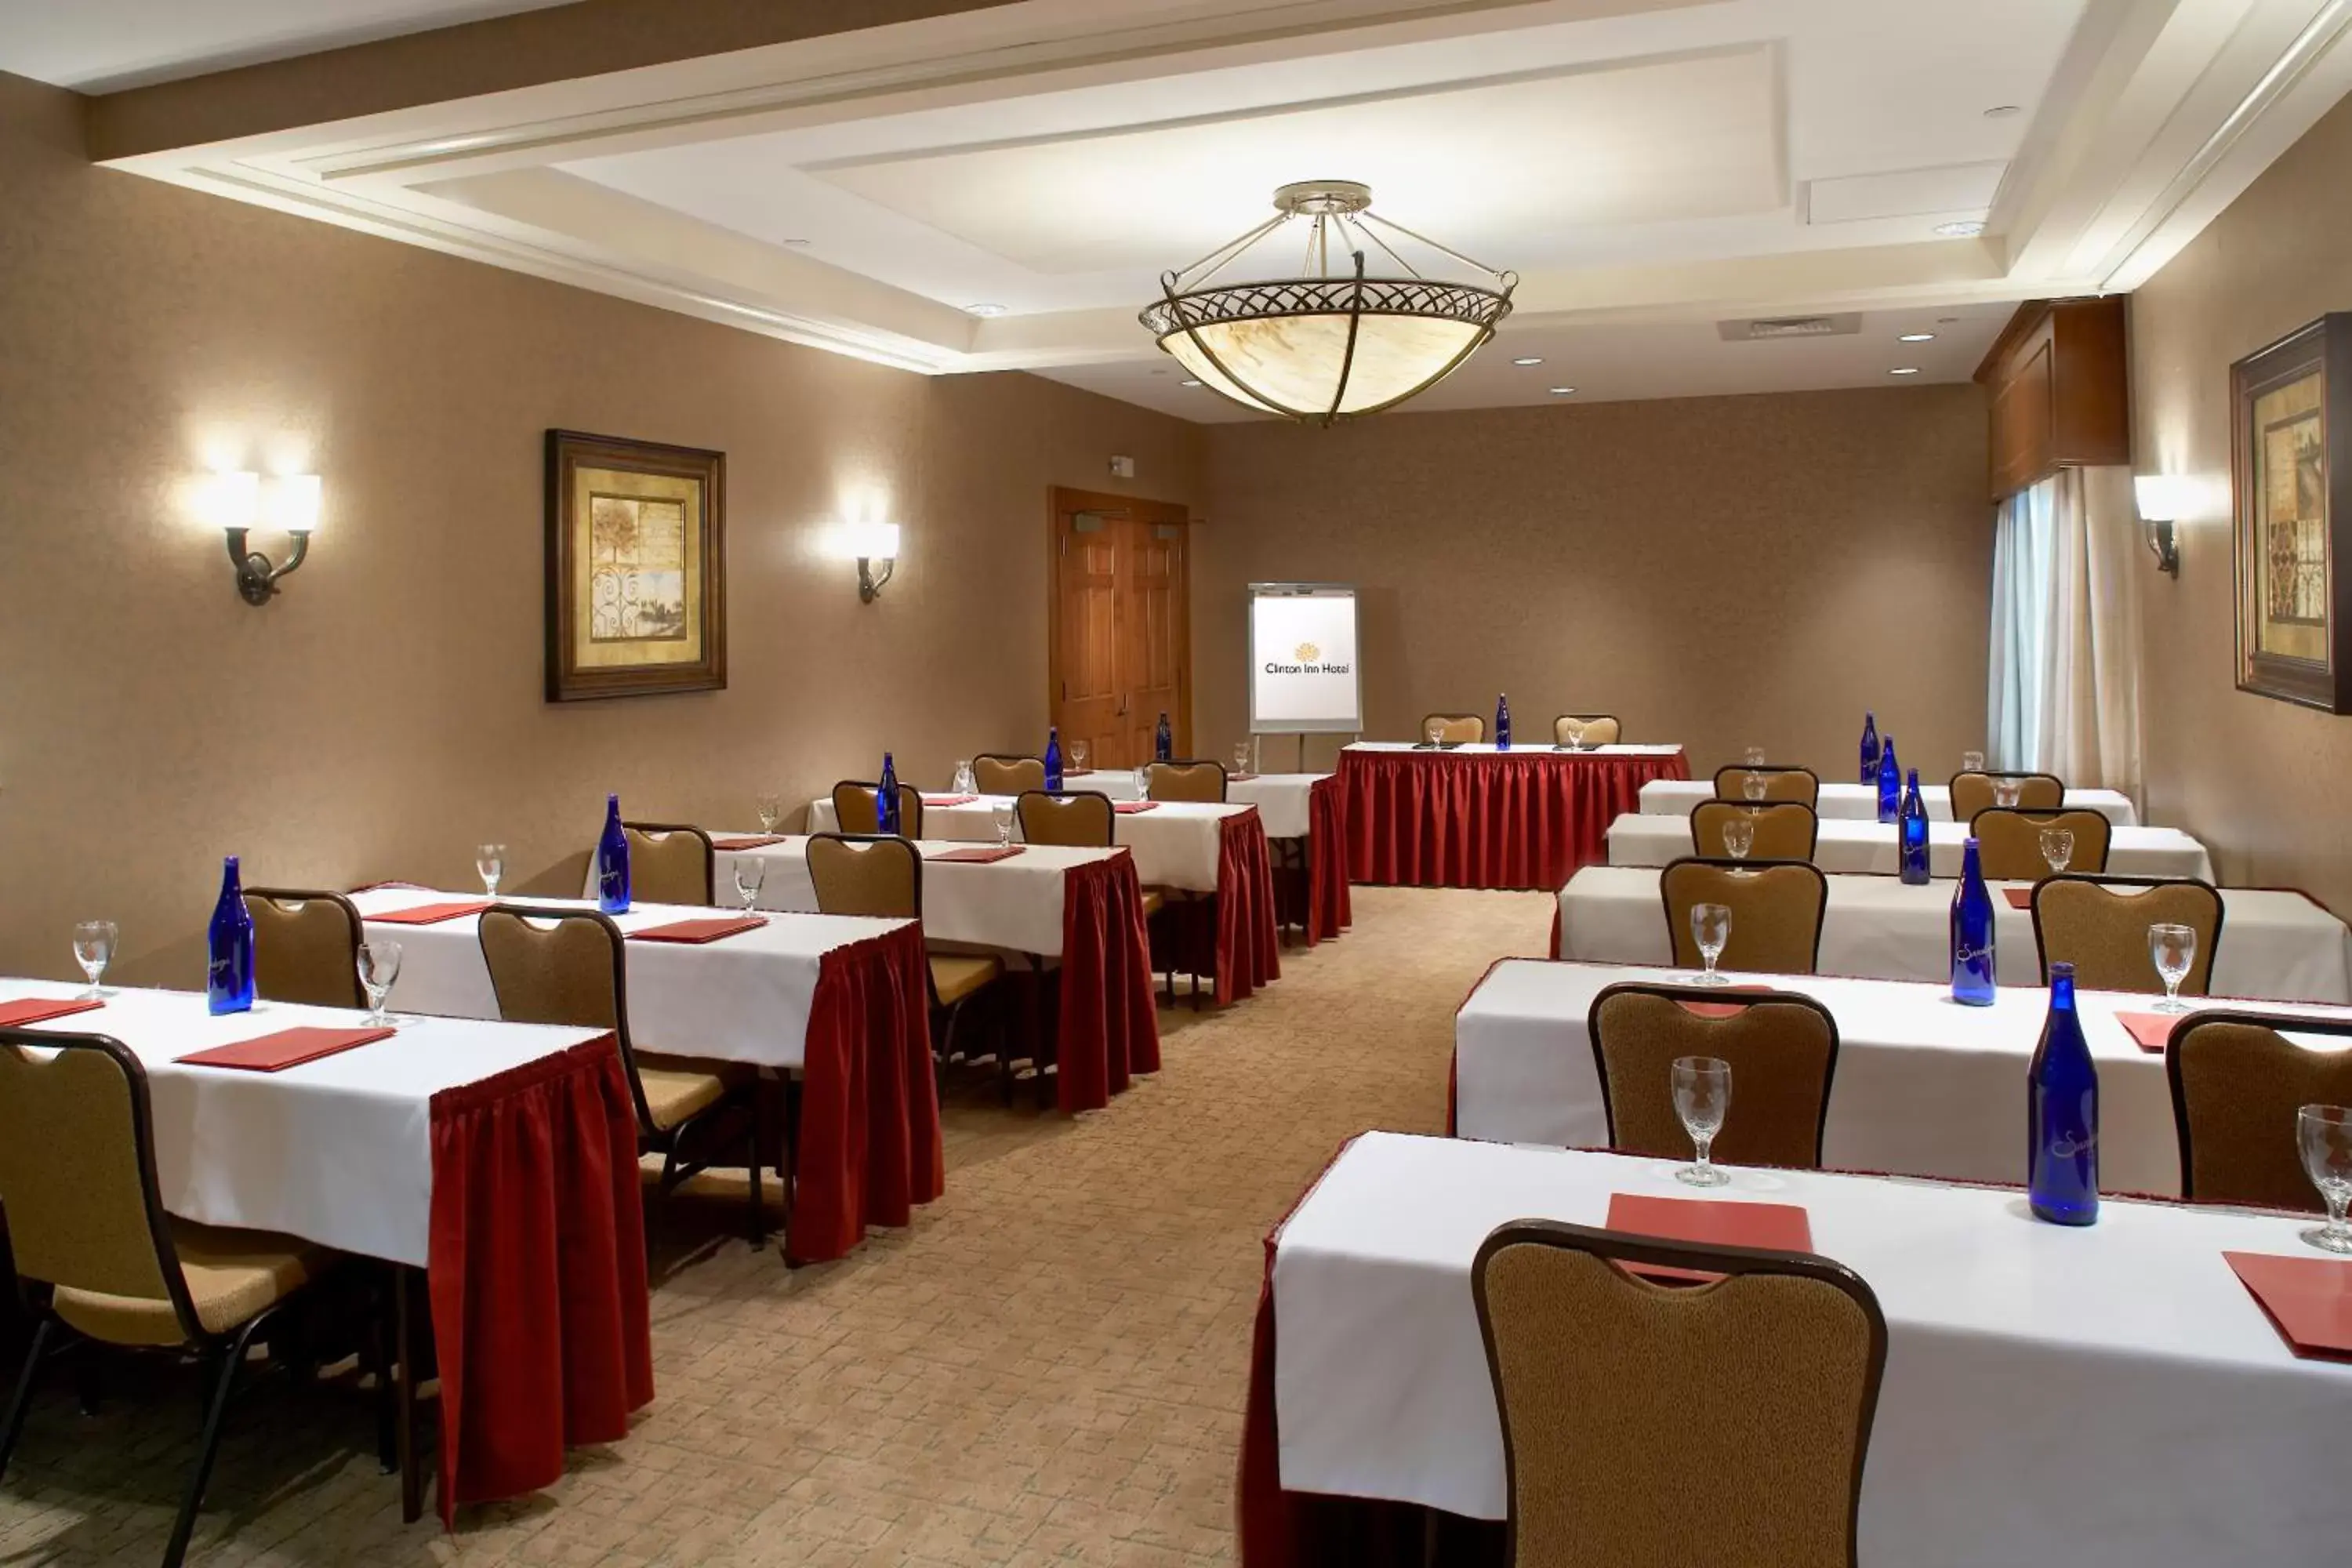 Meeting/conference room in Clinton Inn Hotel Tenafly